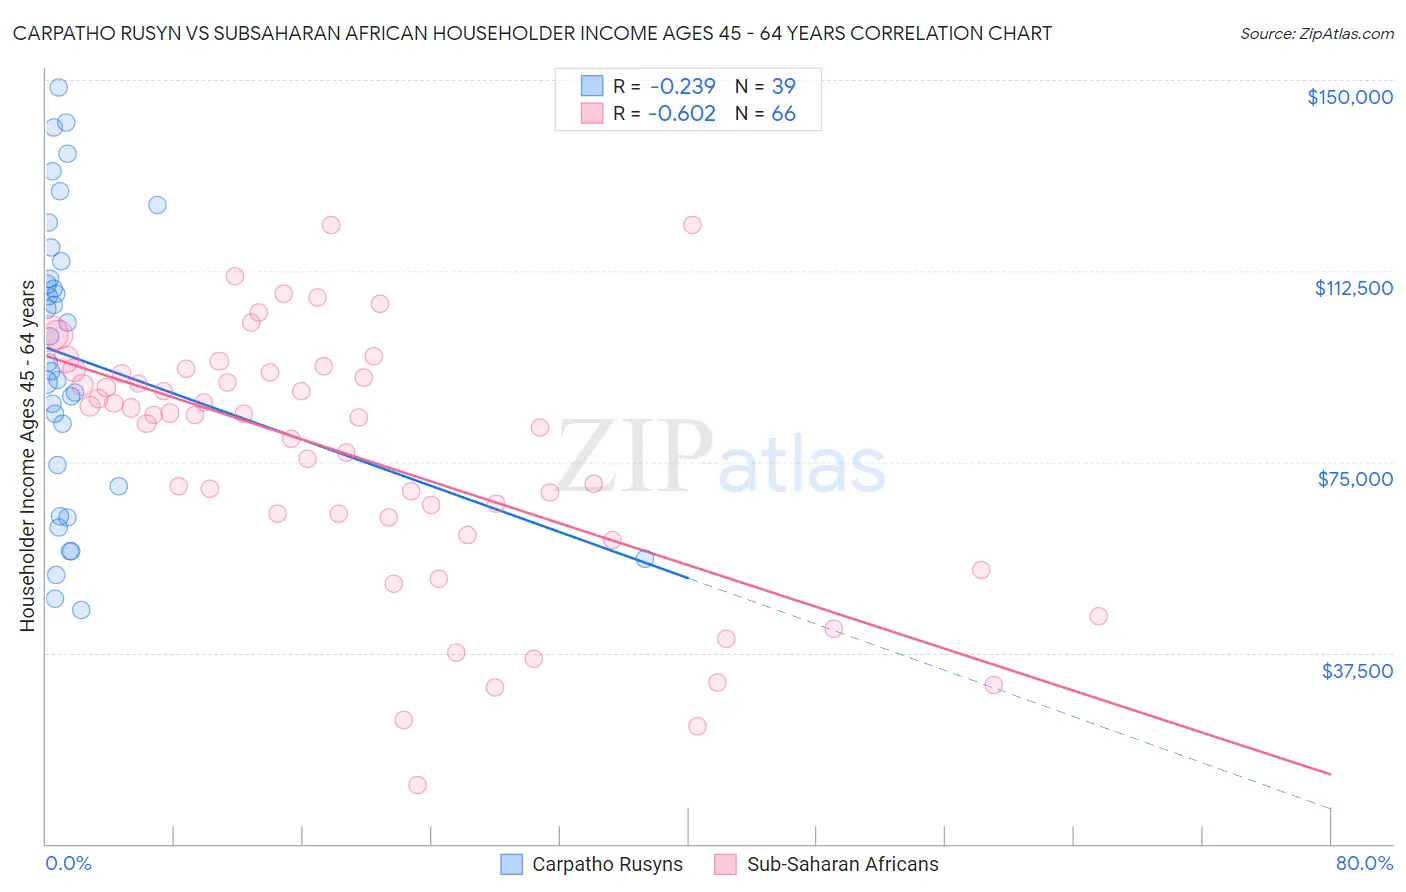 Carpatho Rusyn vs Subsaharan African Householder Income Ages 45 - 64 years